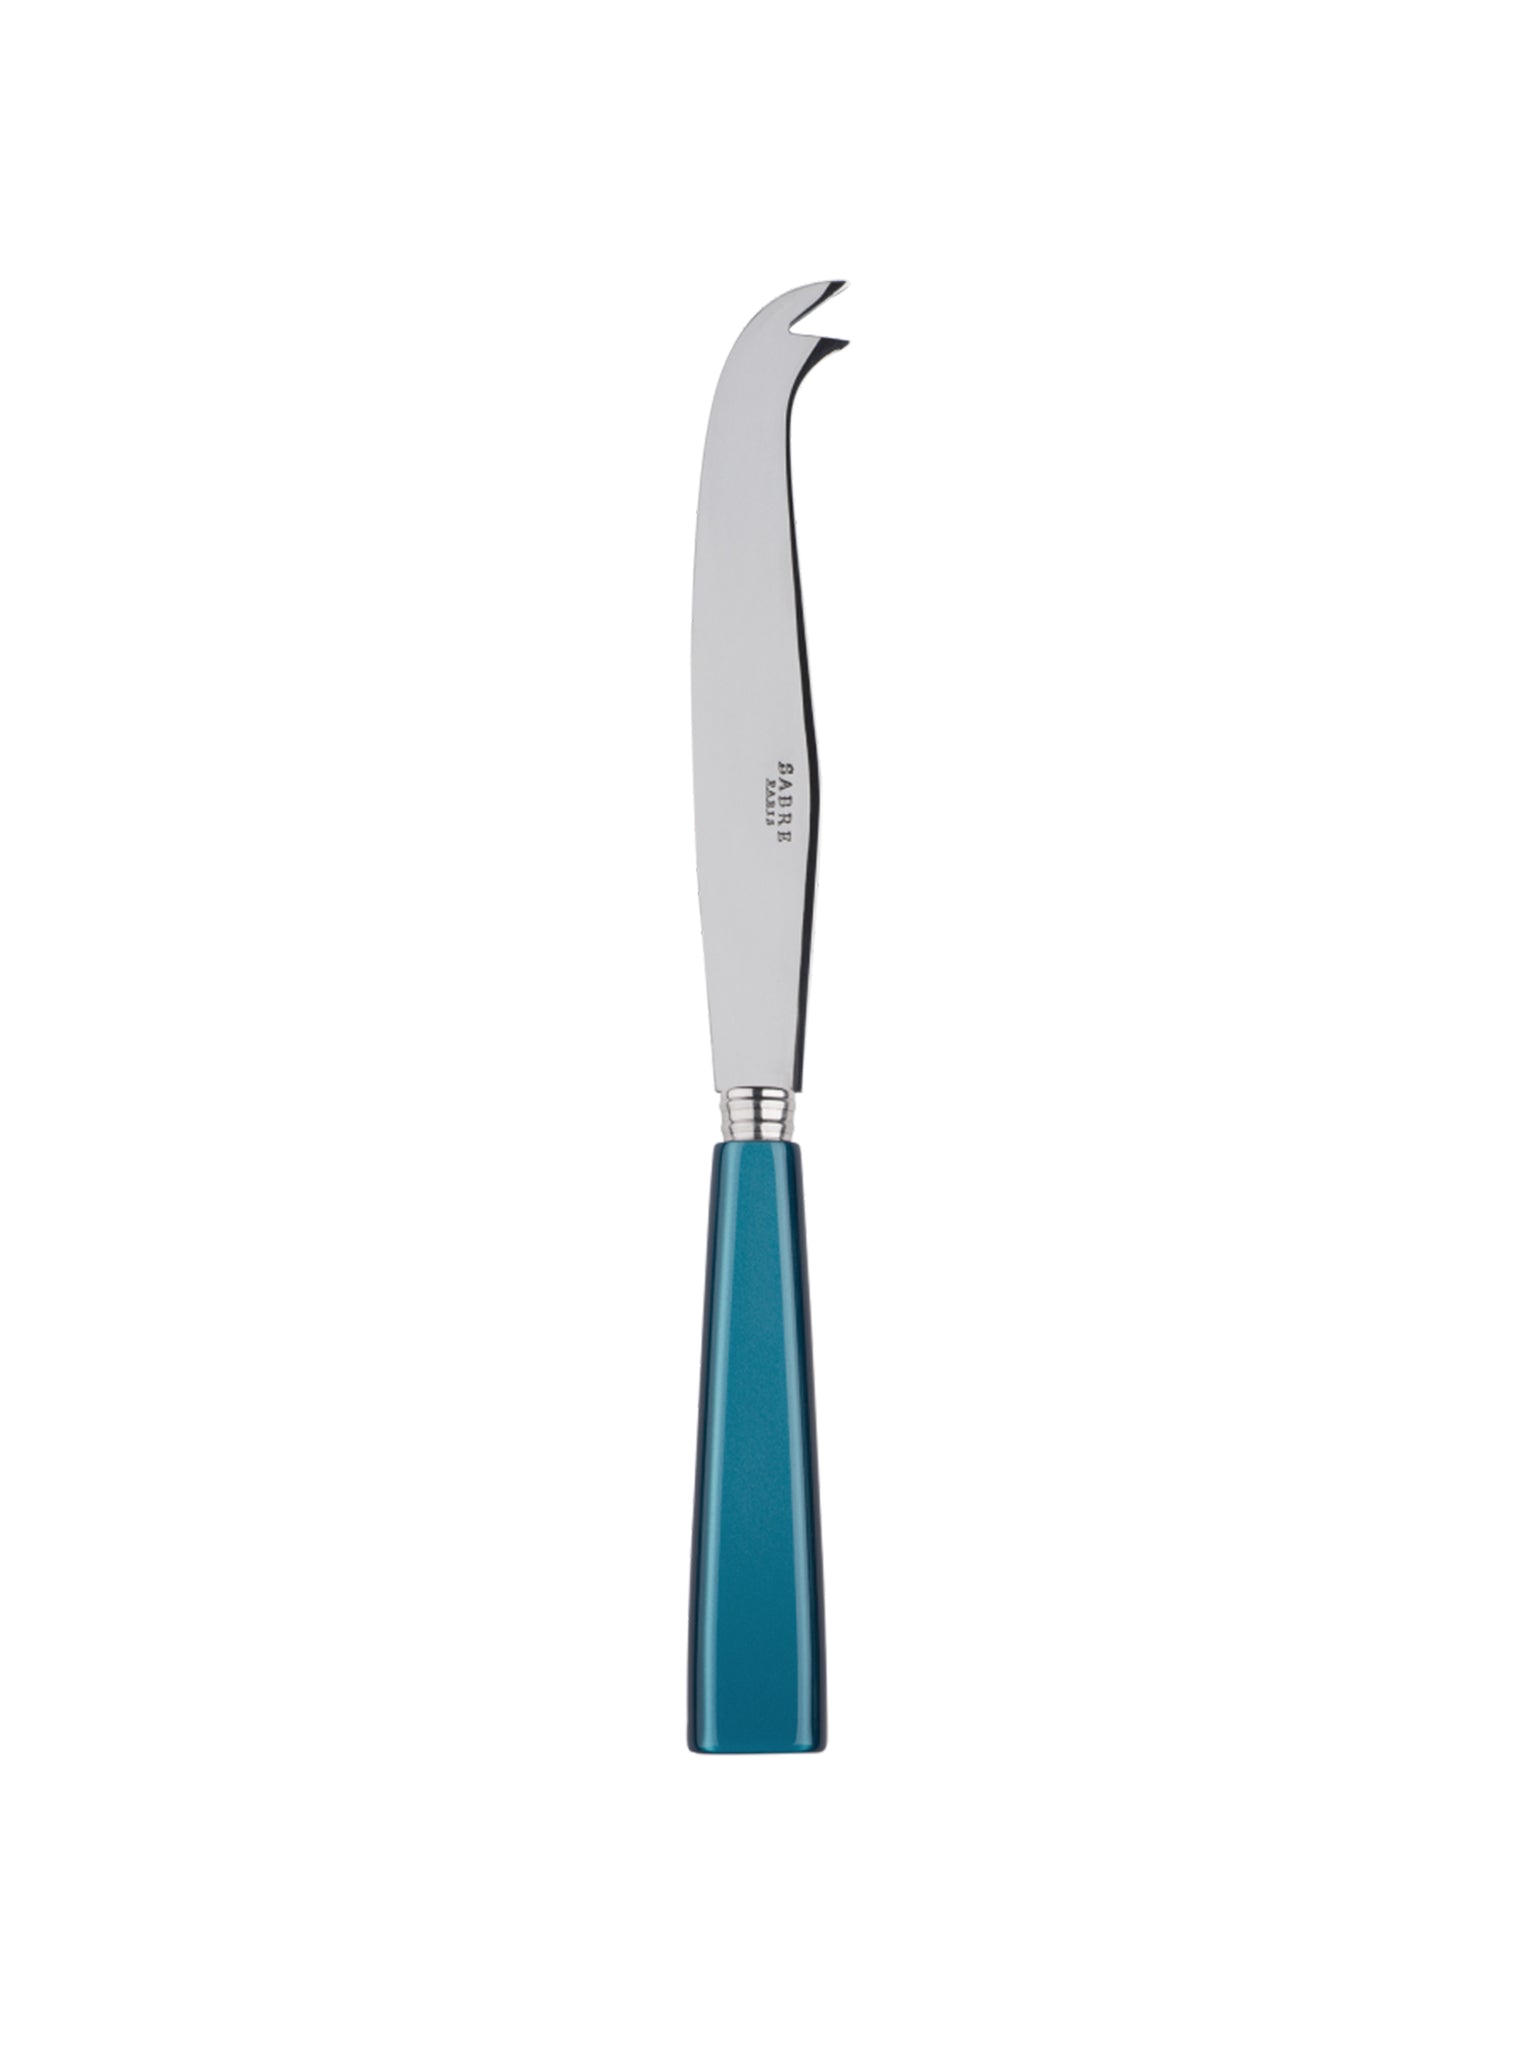 Sabre Paris Icone Turquoise Small Cheese Knife Weston Table